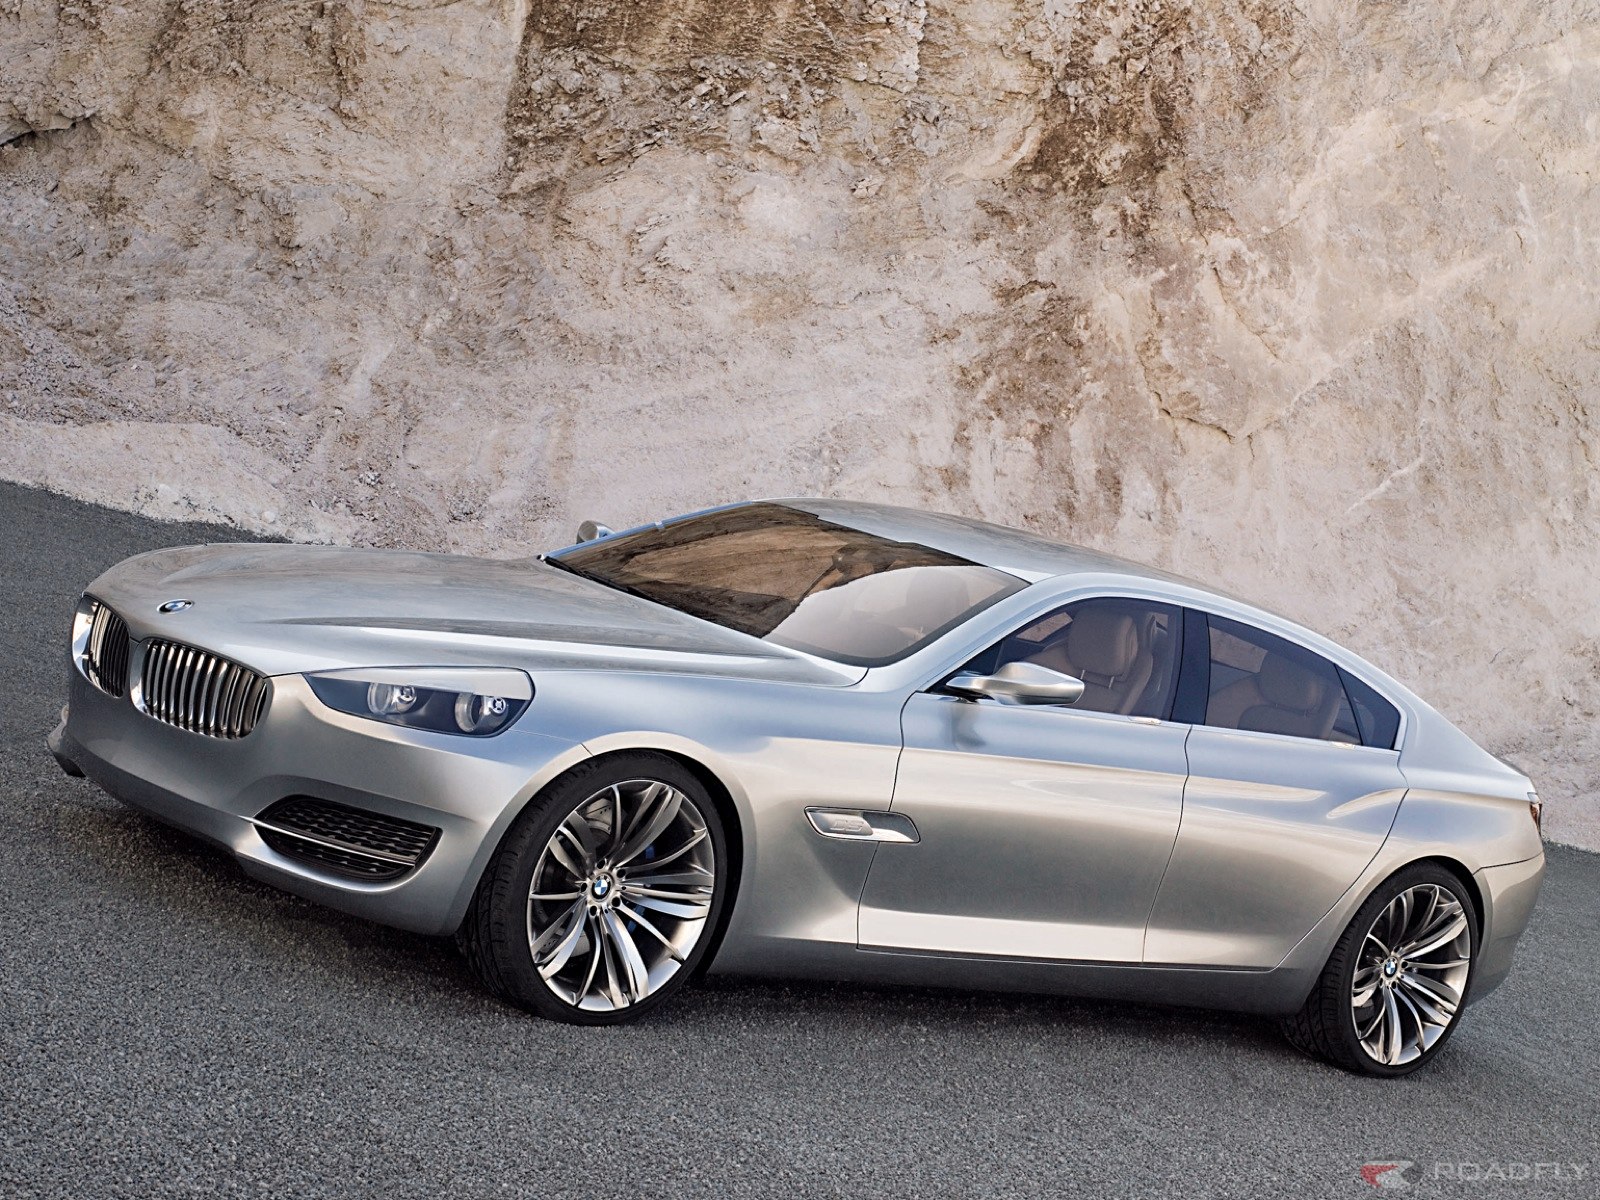 More than any other sedan in the past, the body design of the BMW Concept CS